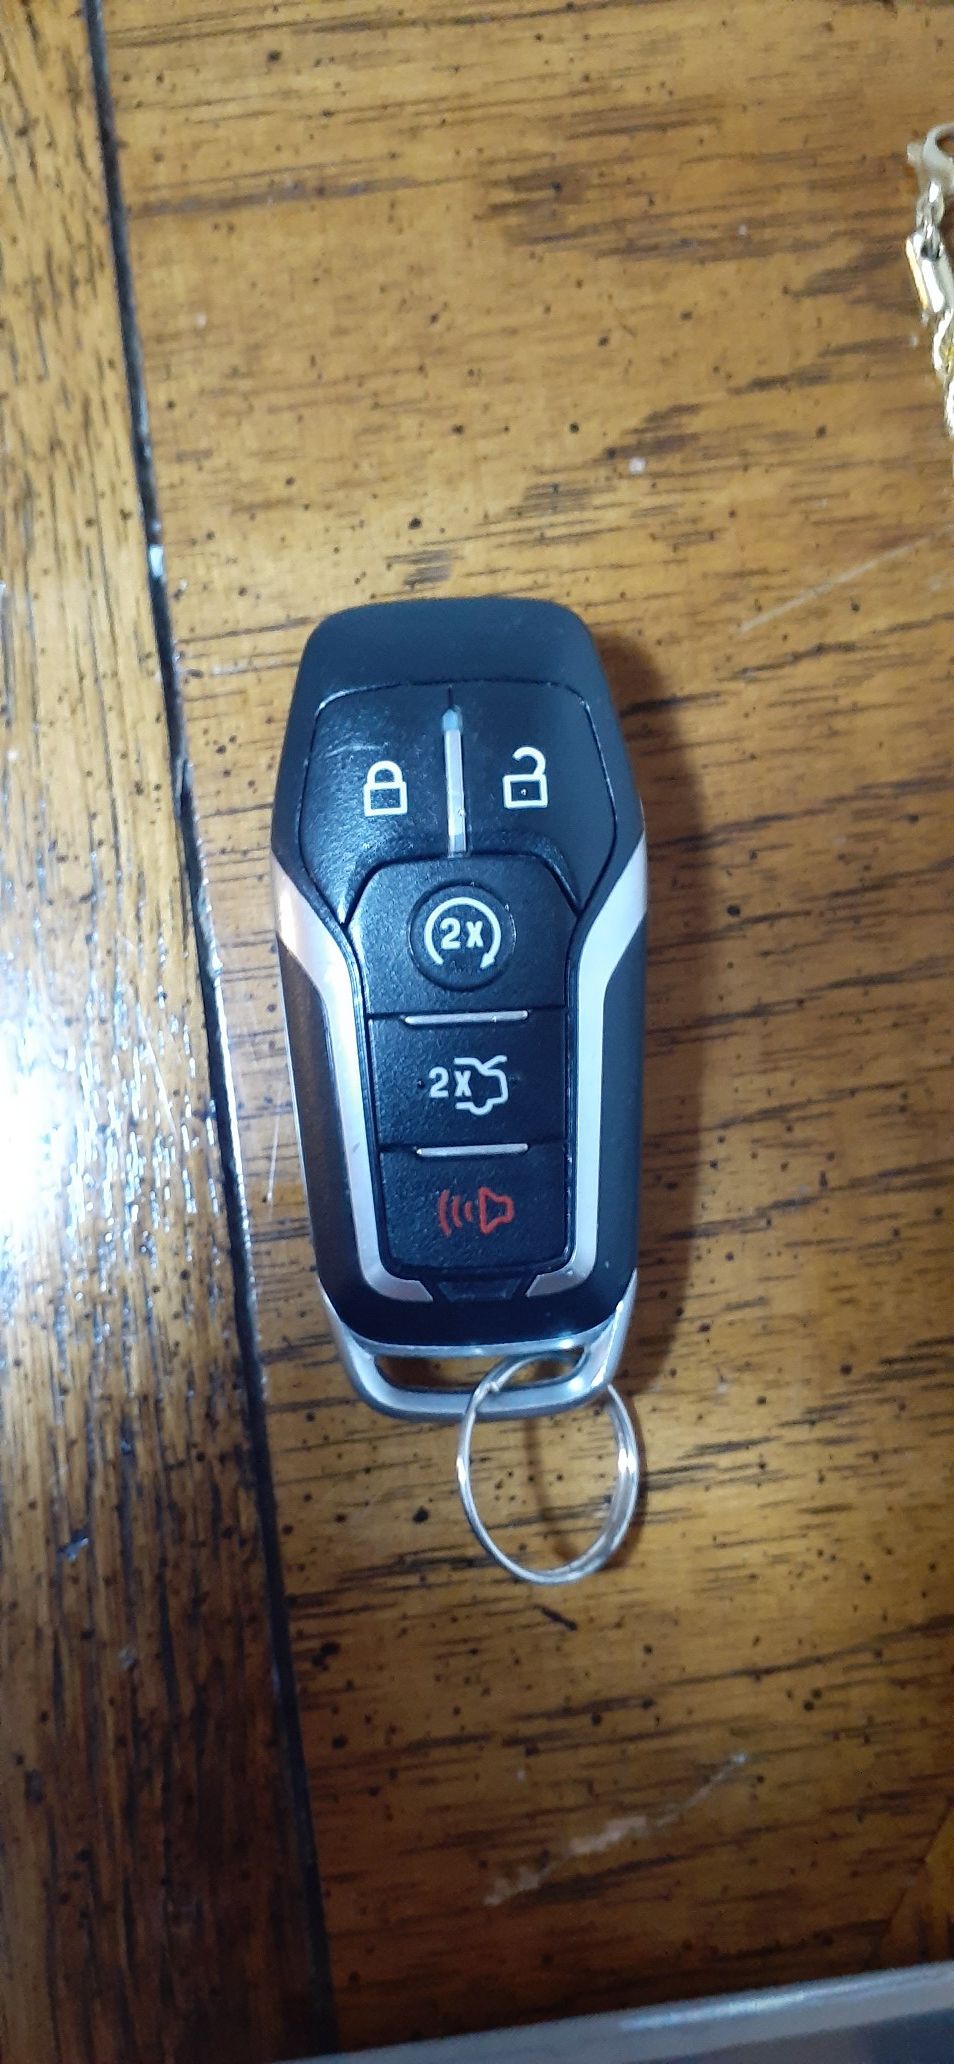 Key fob for 2015 fors